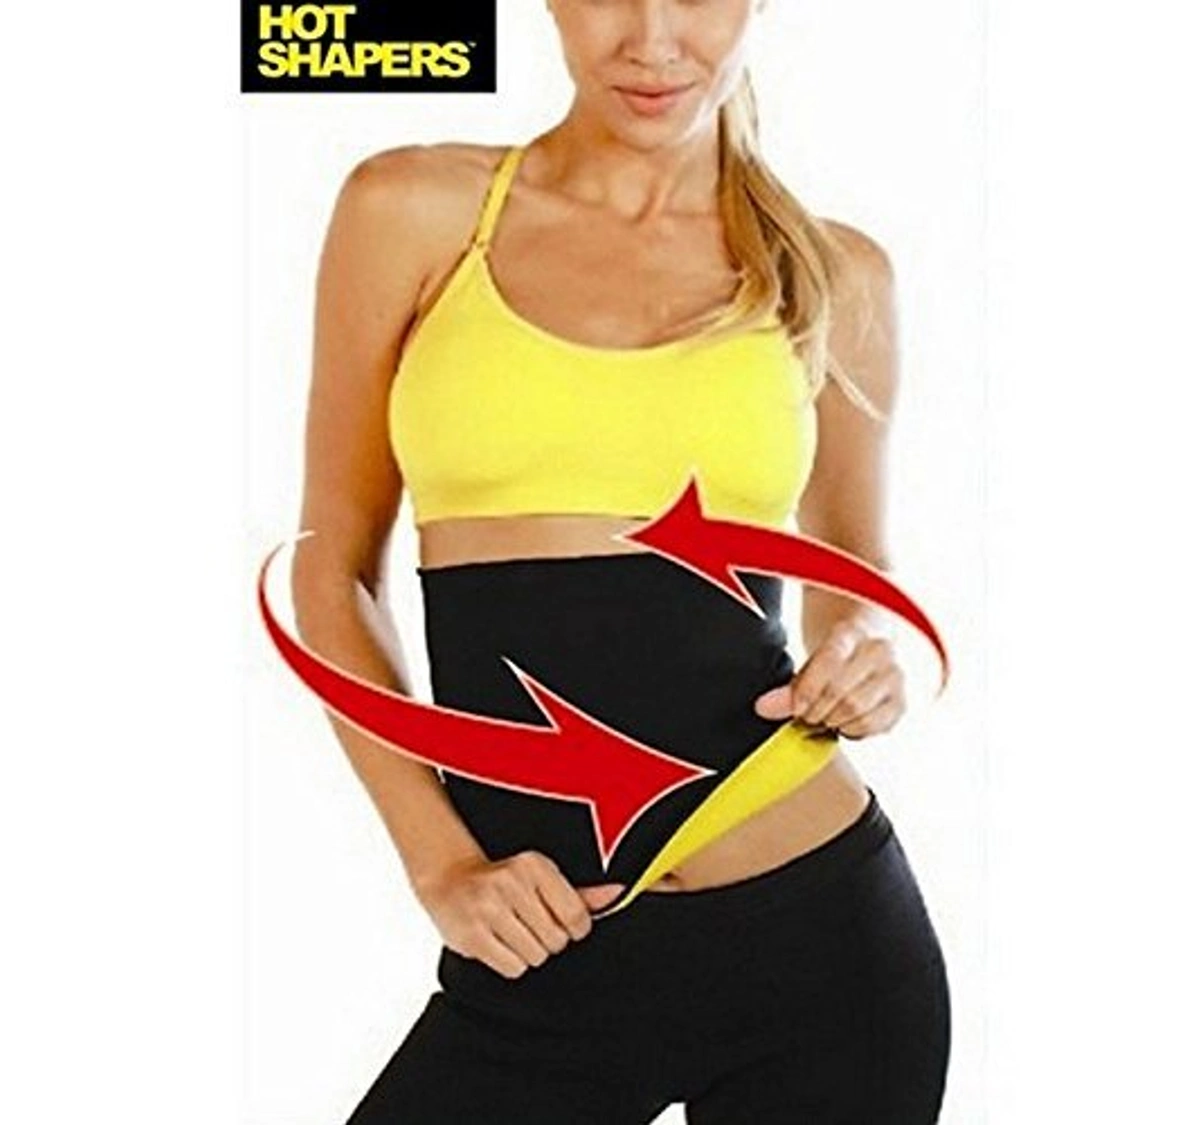 Buy Hot Slimming Shaper Belt (Pack Of 1 - Multicolor) at Sehgall G413